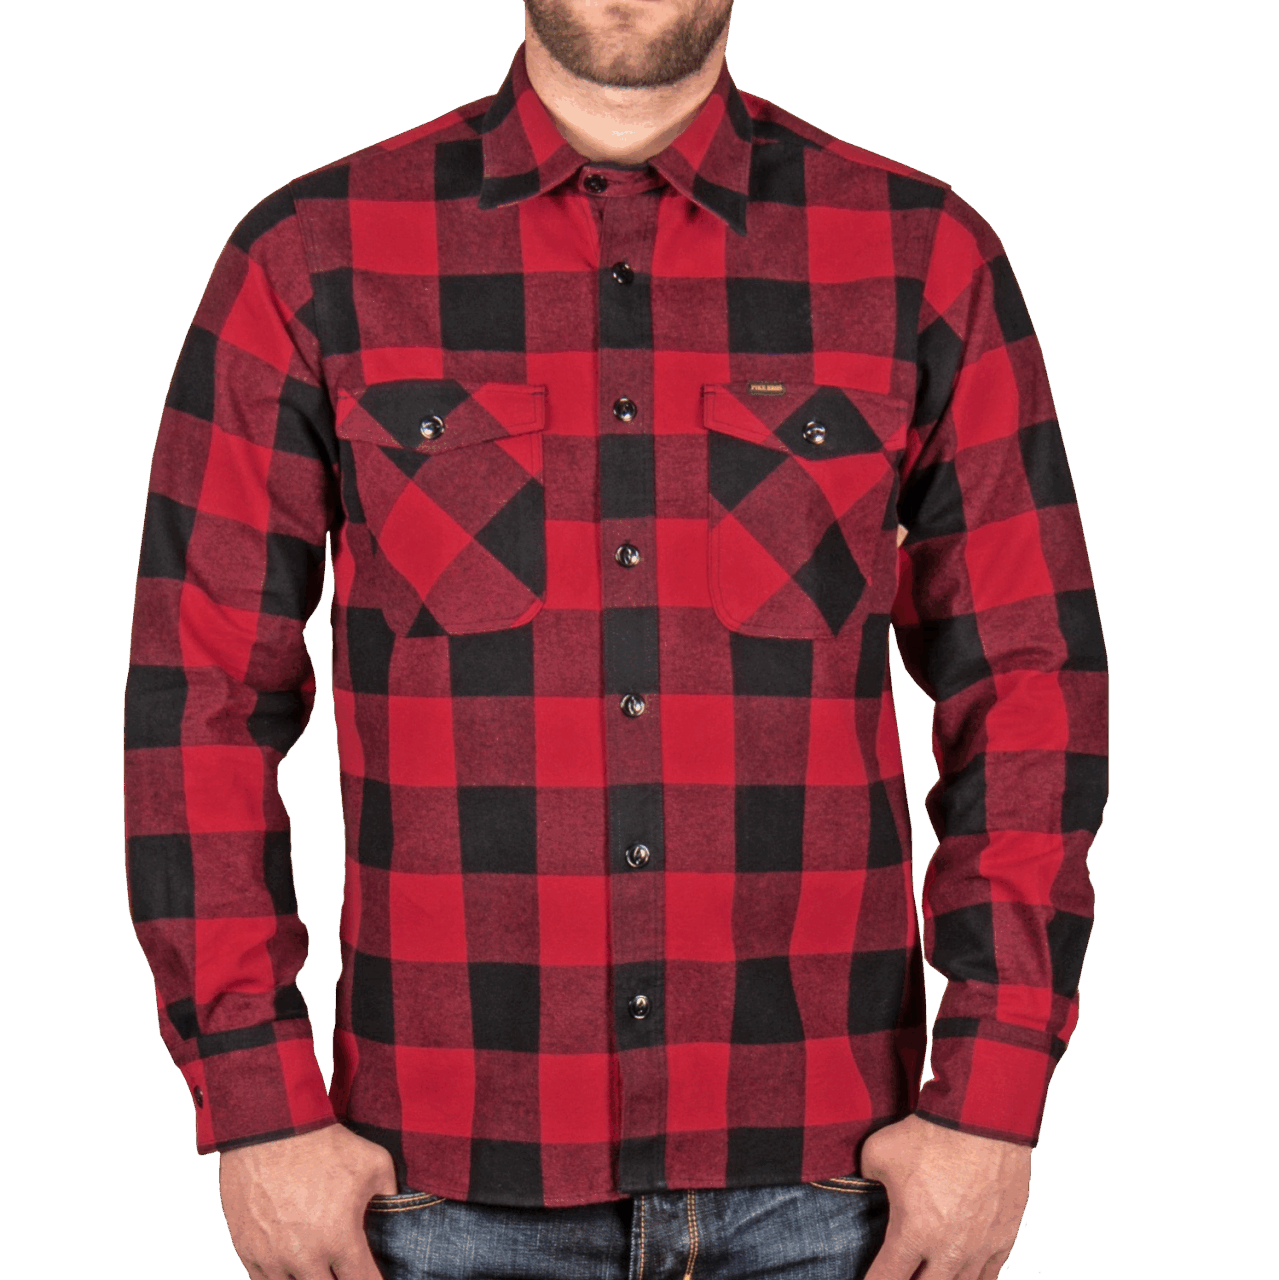 Pike Brothers 1943 CPO Shirt - Hoover Red